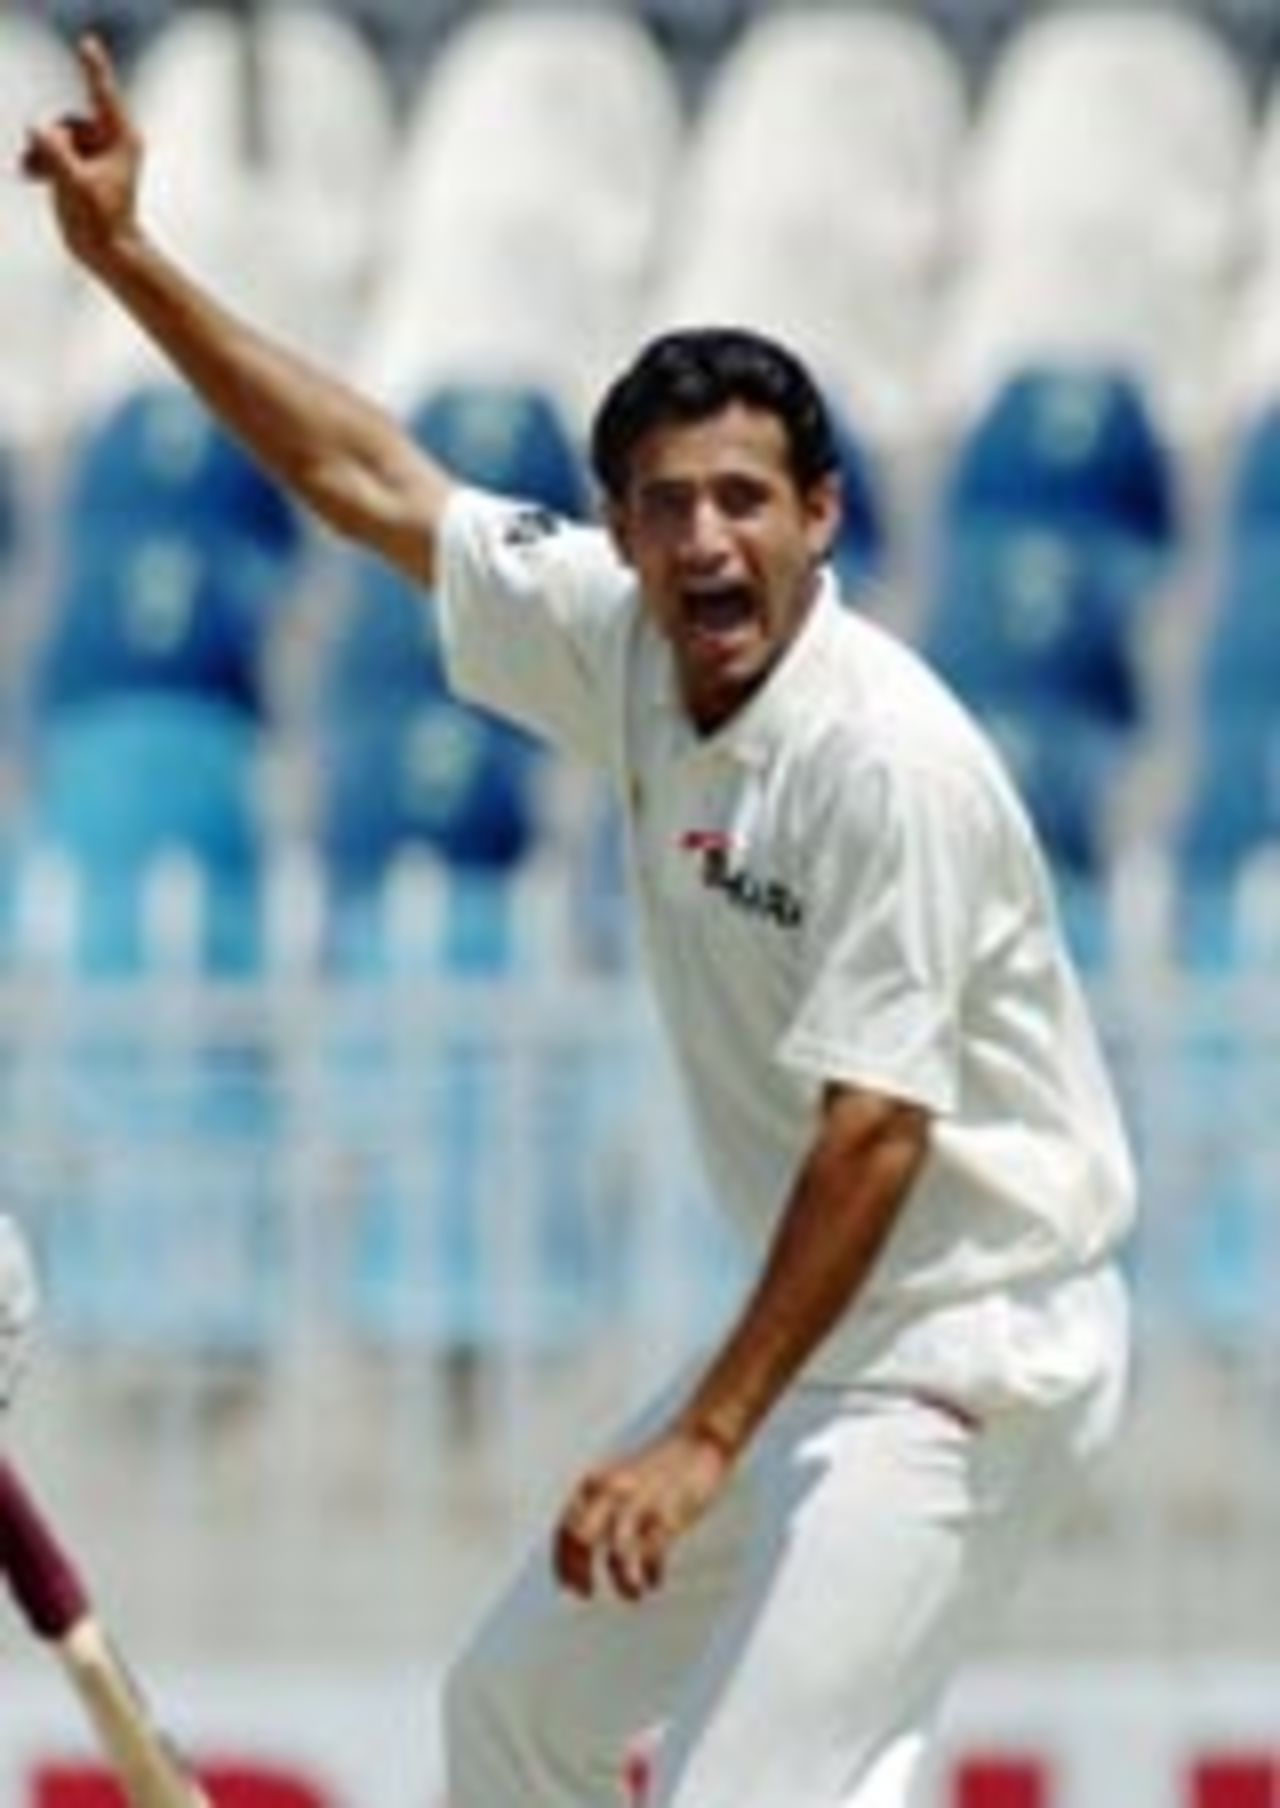 Irfan Pathan appeals unsuccessfully against Yasir Hameed, Pakistan v India, 3rd Test, Rawalpindi, 1st day, April 12, 2004